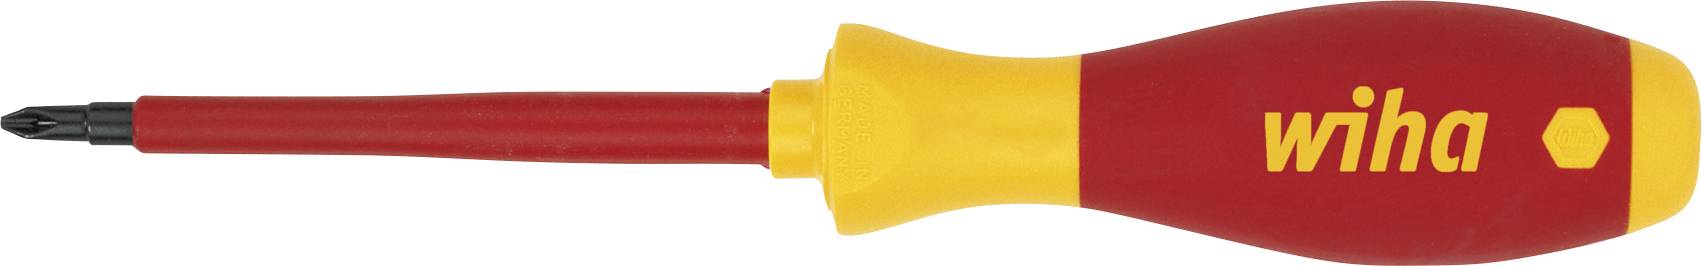 VDE SCREWDRIVER PH3 T49142-3 By CK TOOLS